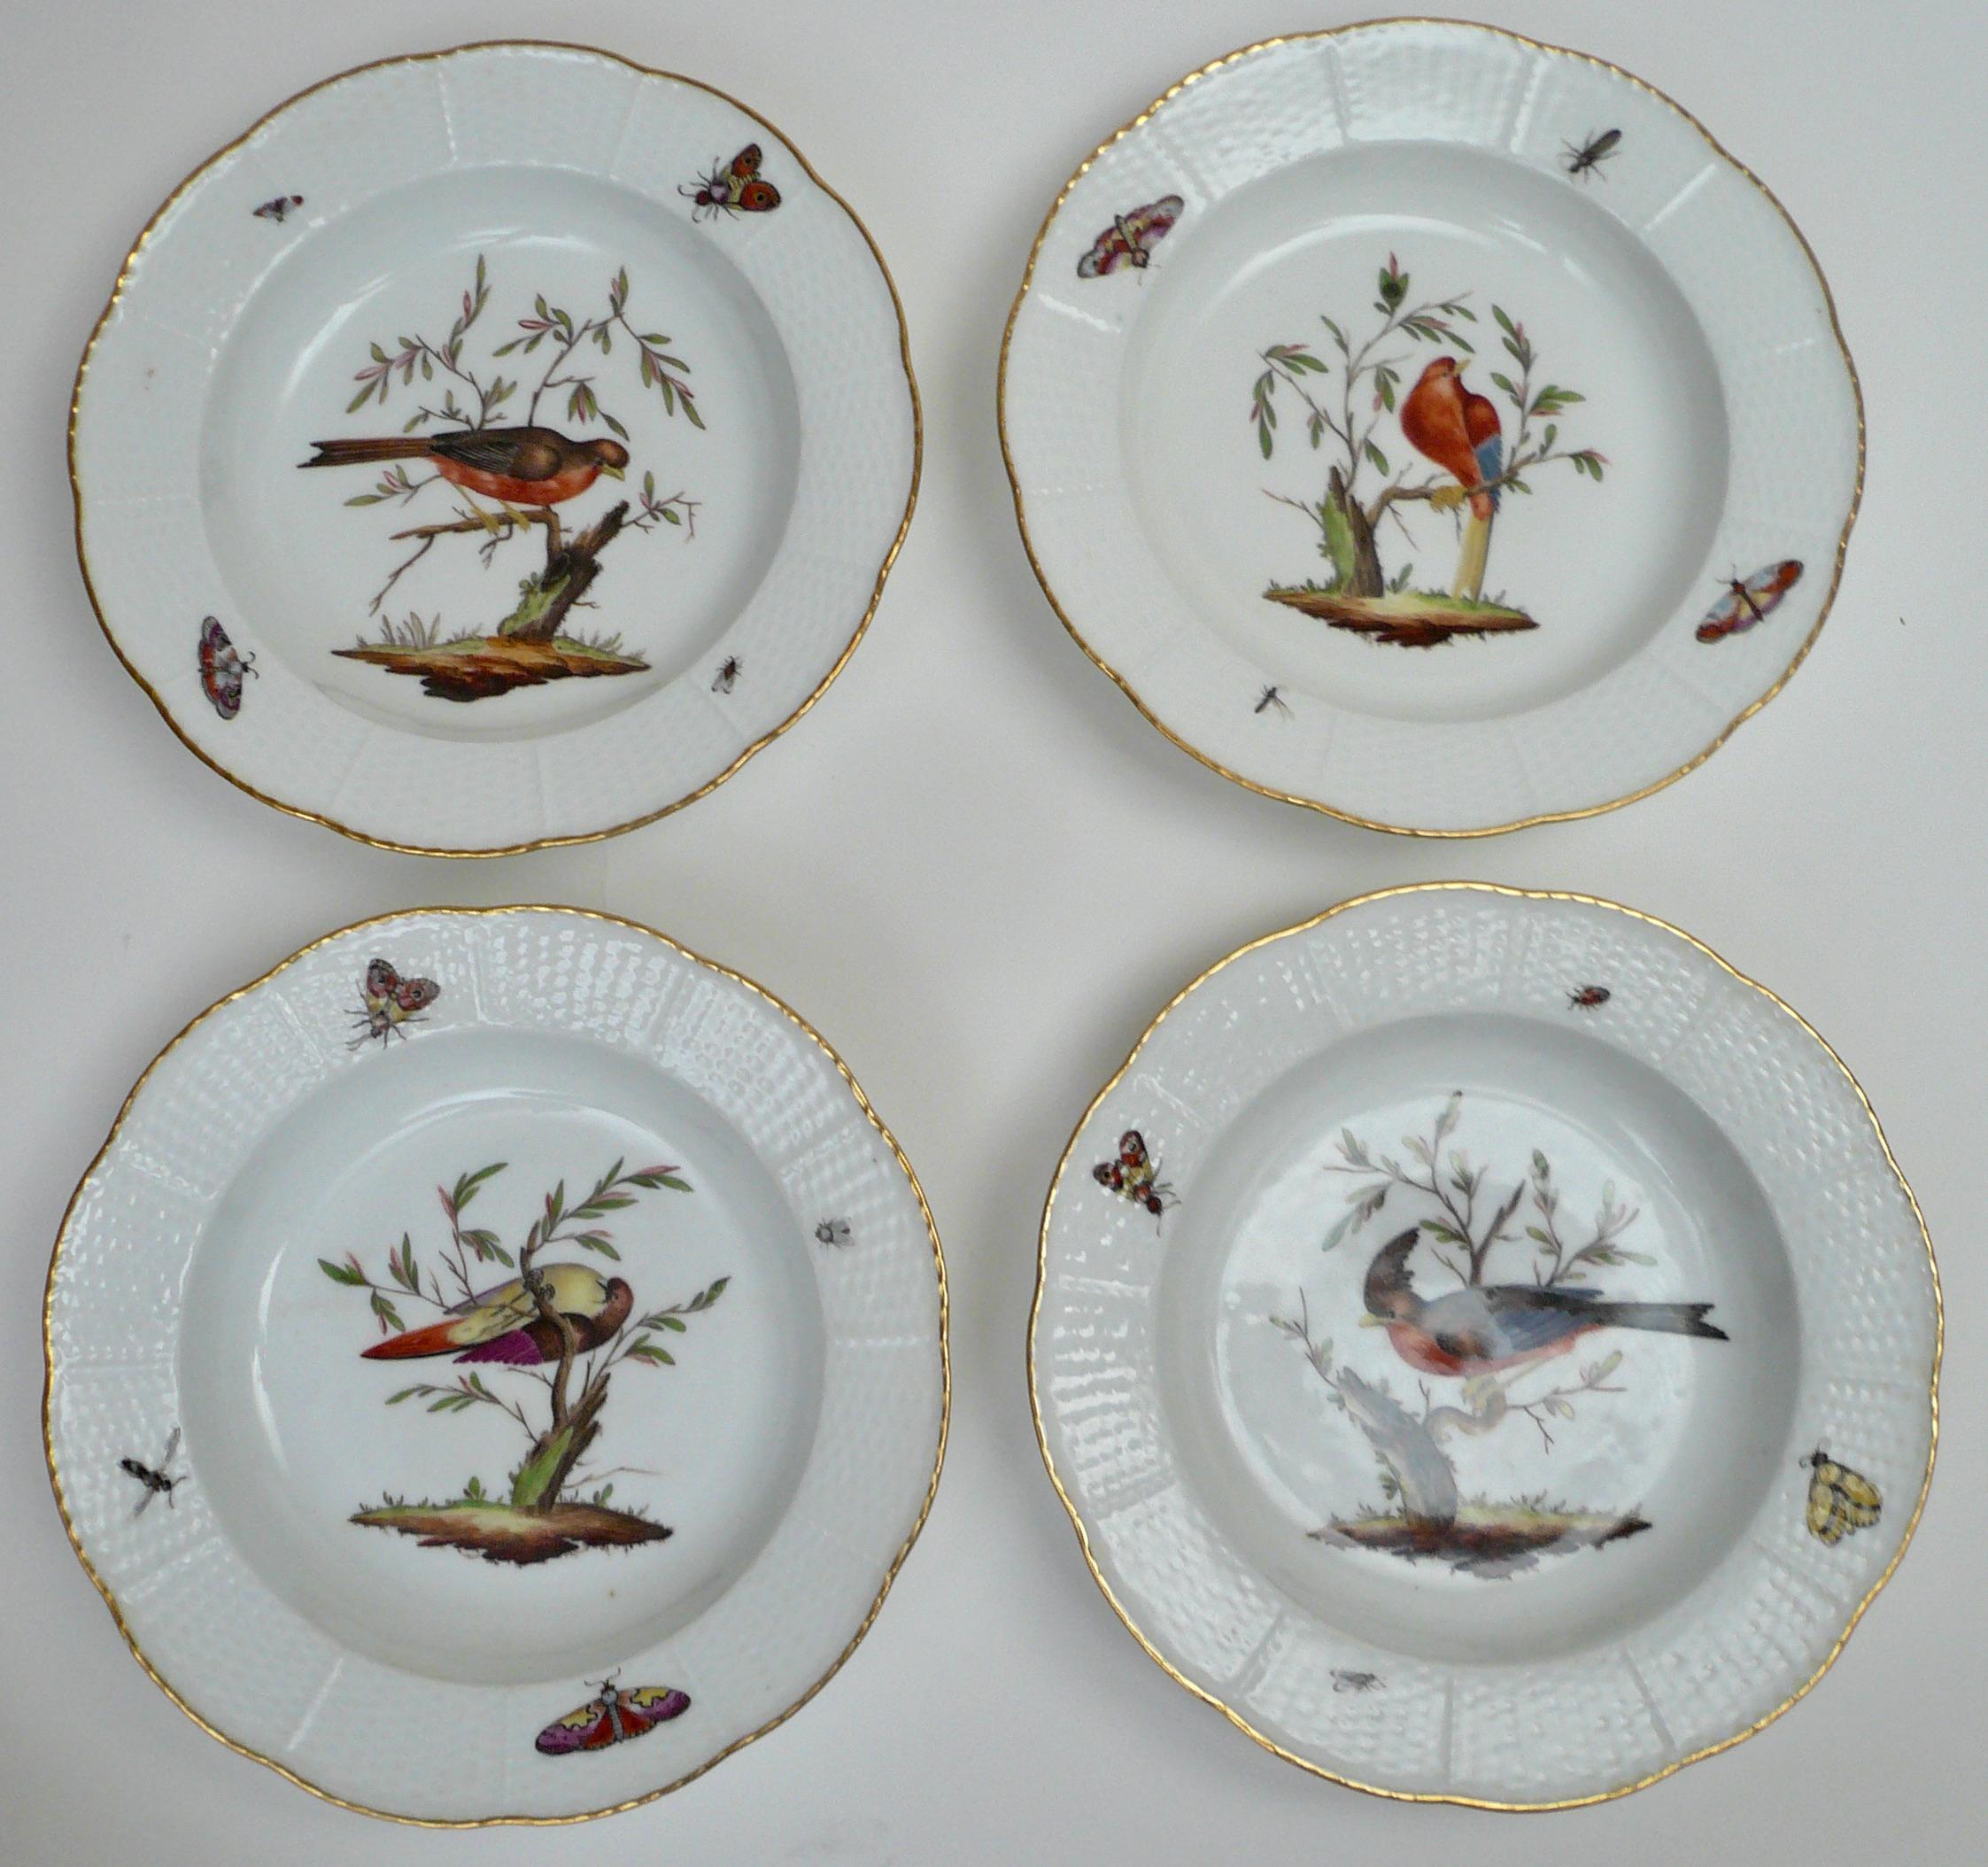 These rare Amstel porcelain hand painted soup plates are beautifully decorated with various birds and insects. They feature basketweave borders, and gilt trim. Measures: 9.25